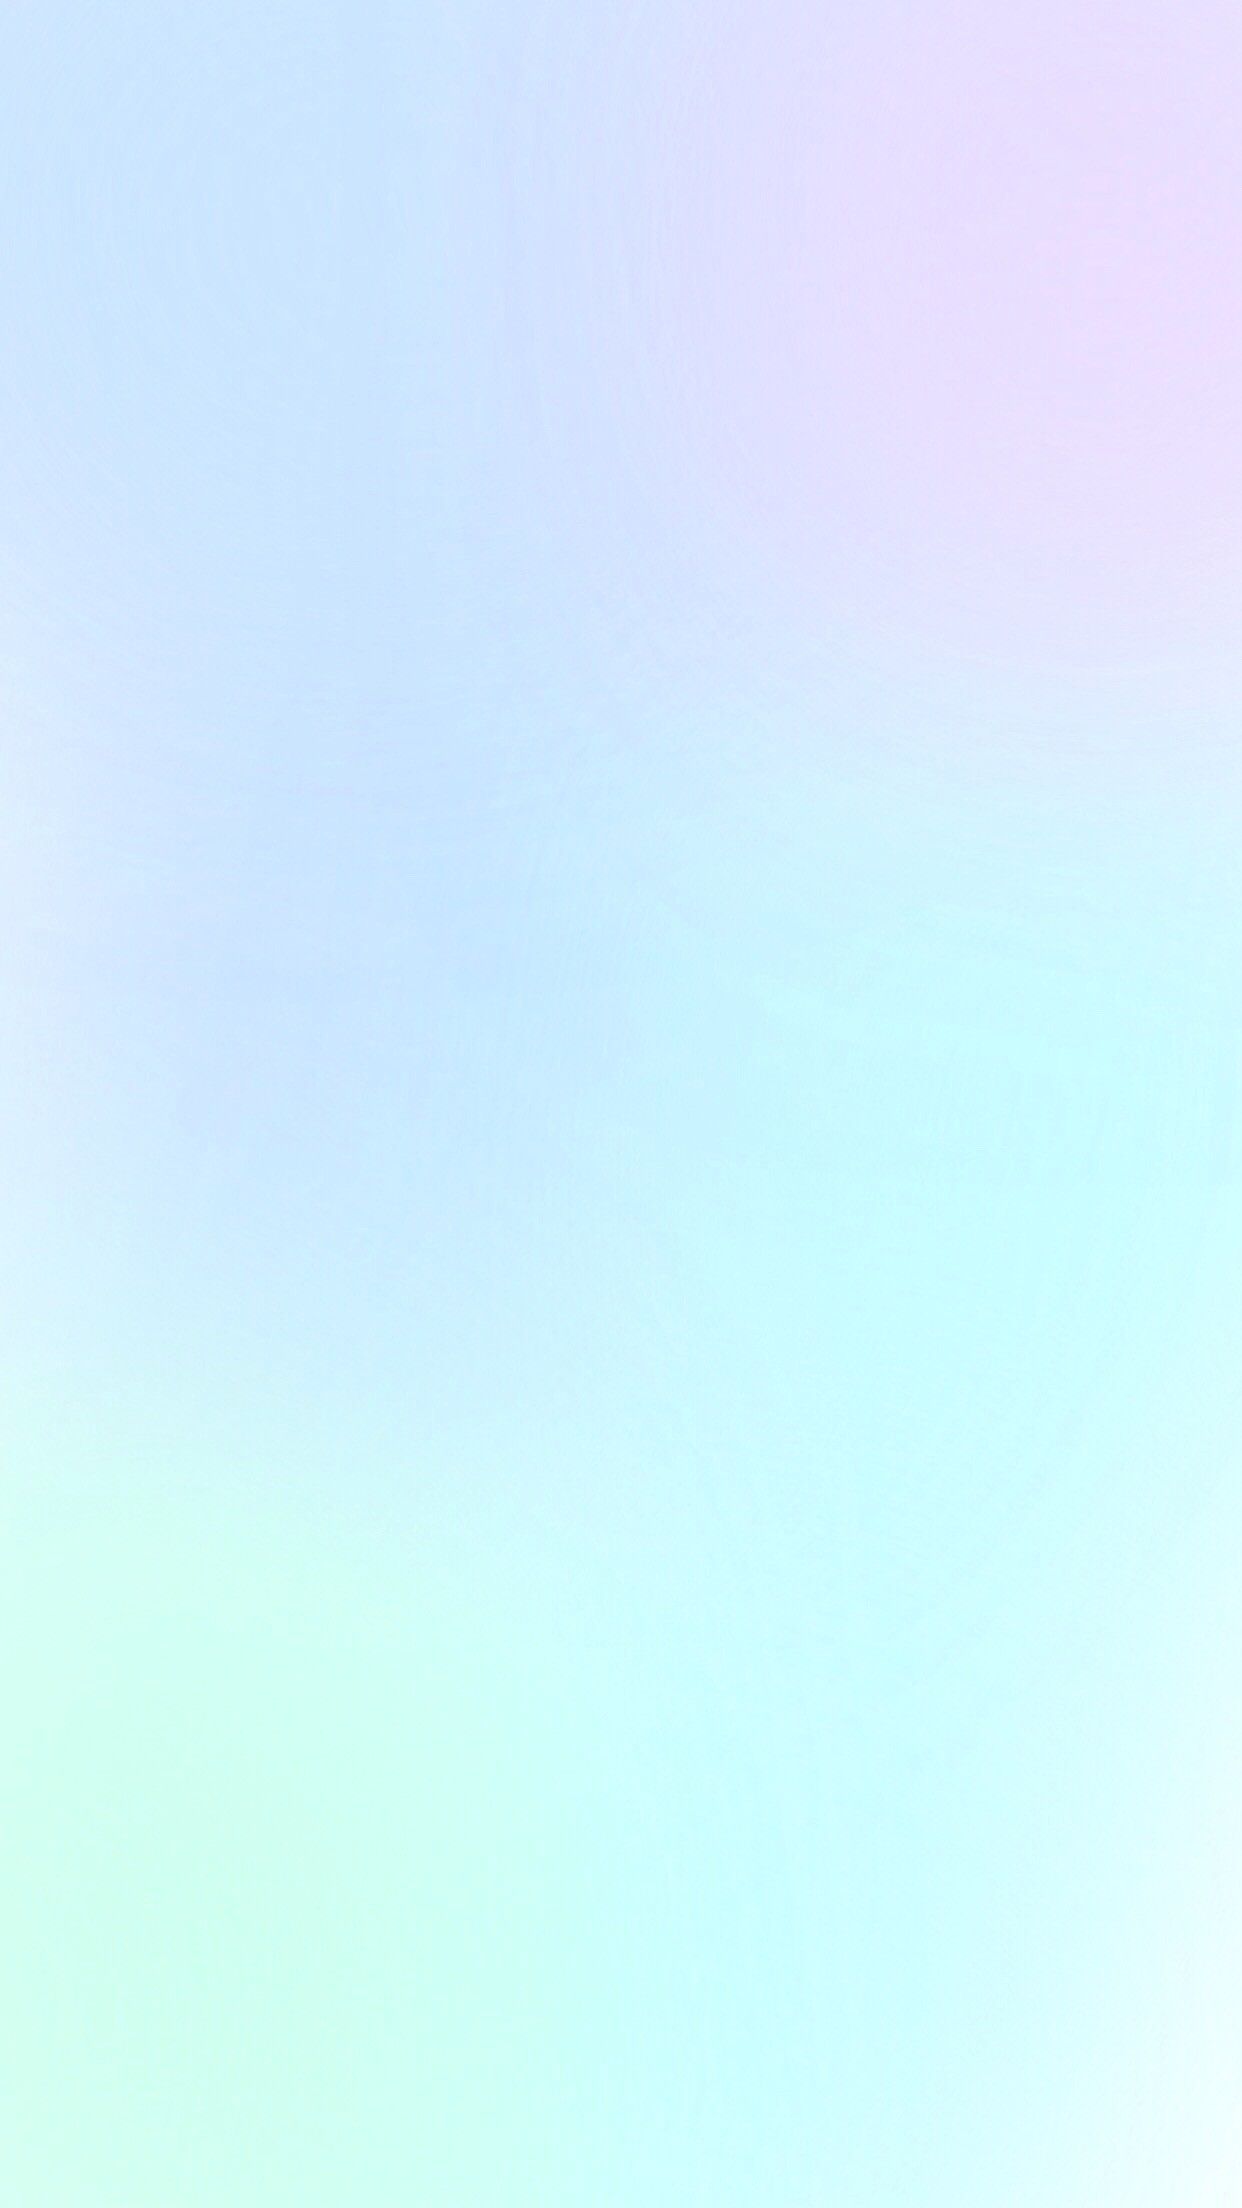 Blue And Pink Ombre Wallpaper Image